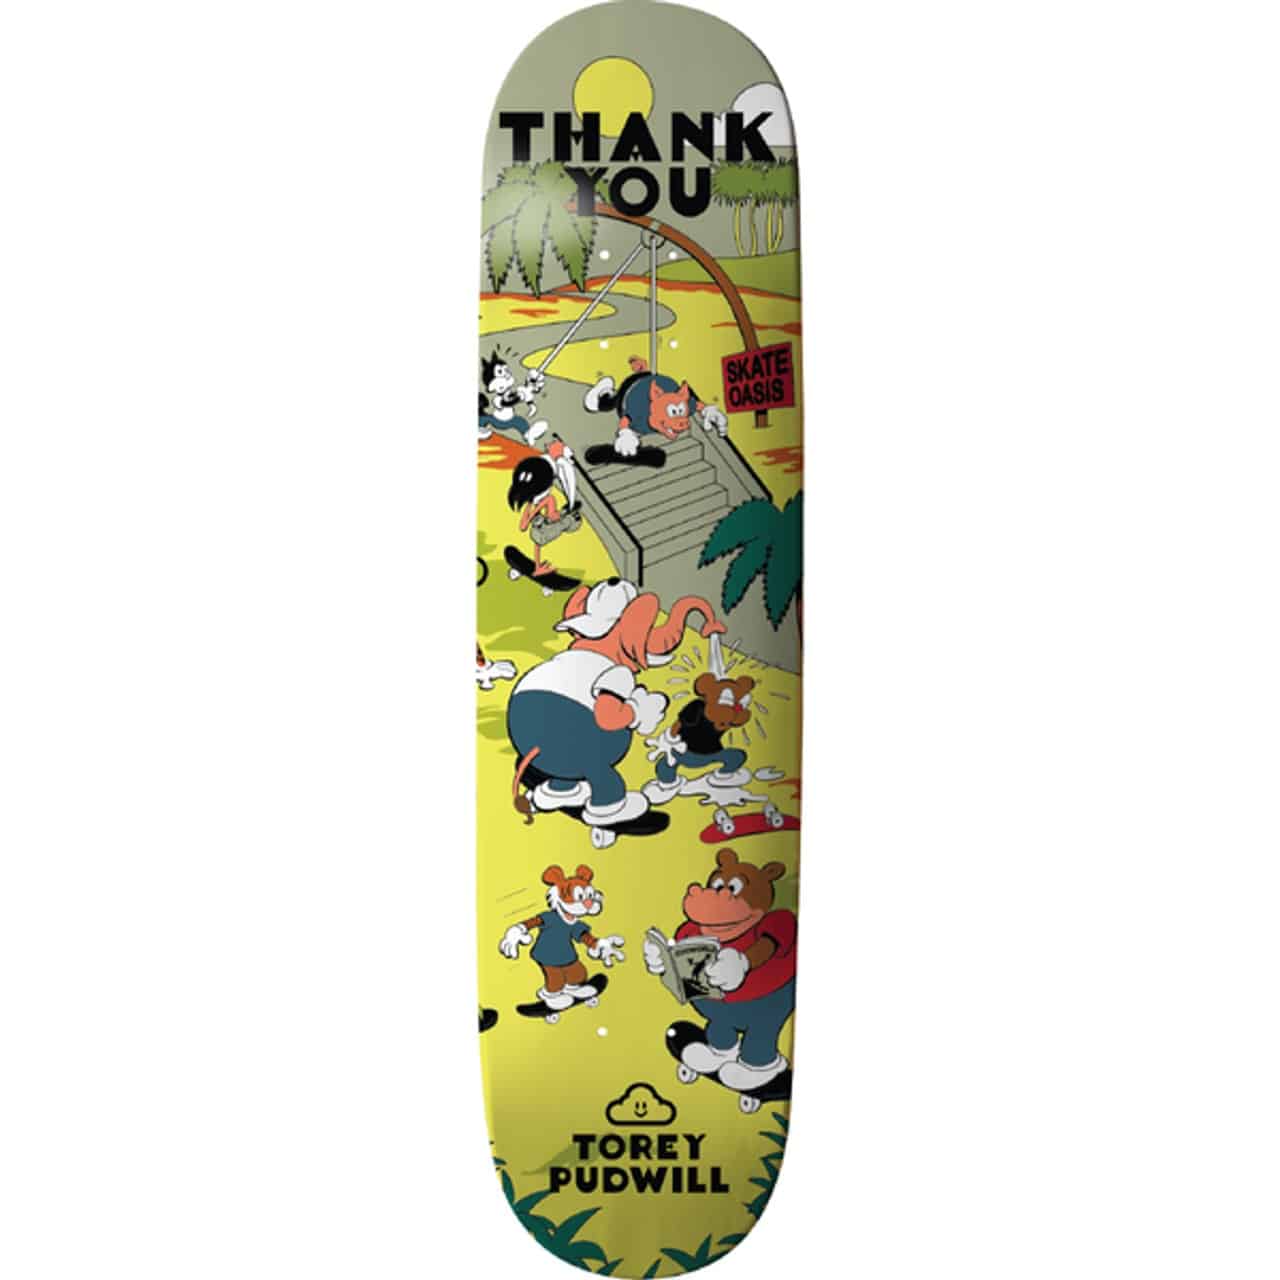 Thank You Skate Oasis Torey Pudwill 8 25 Multi deck